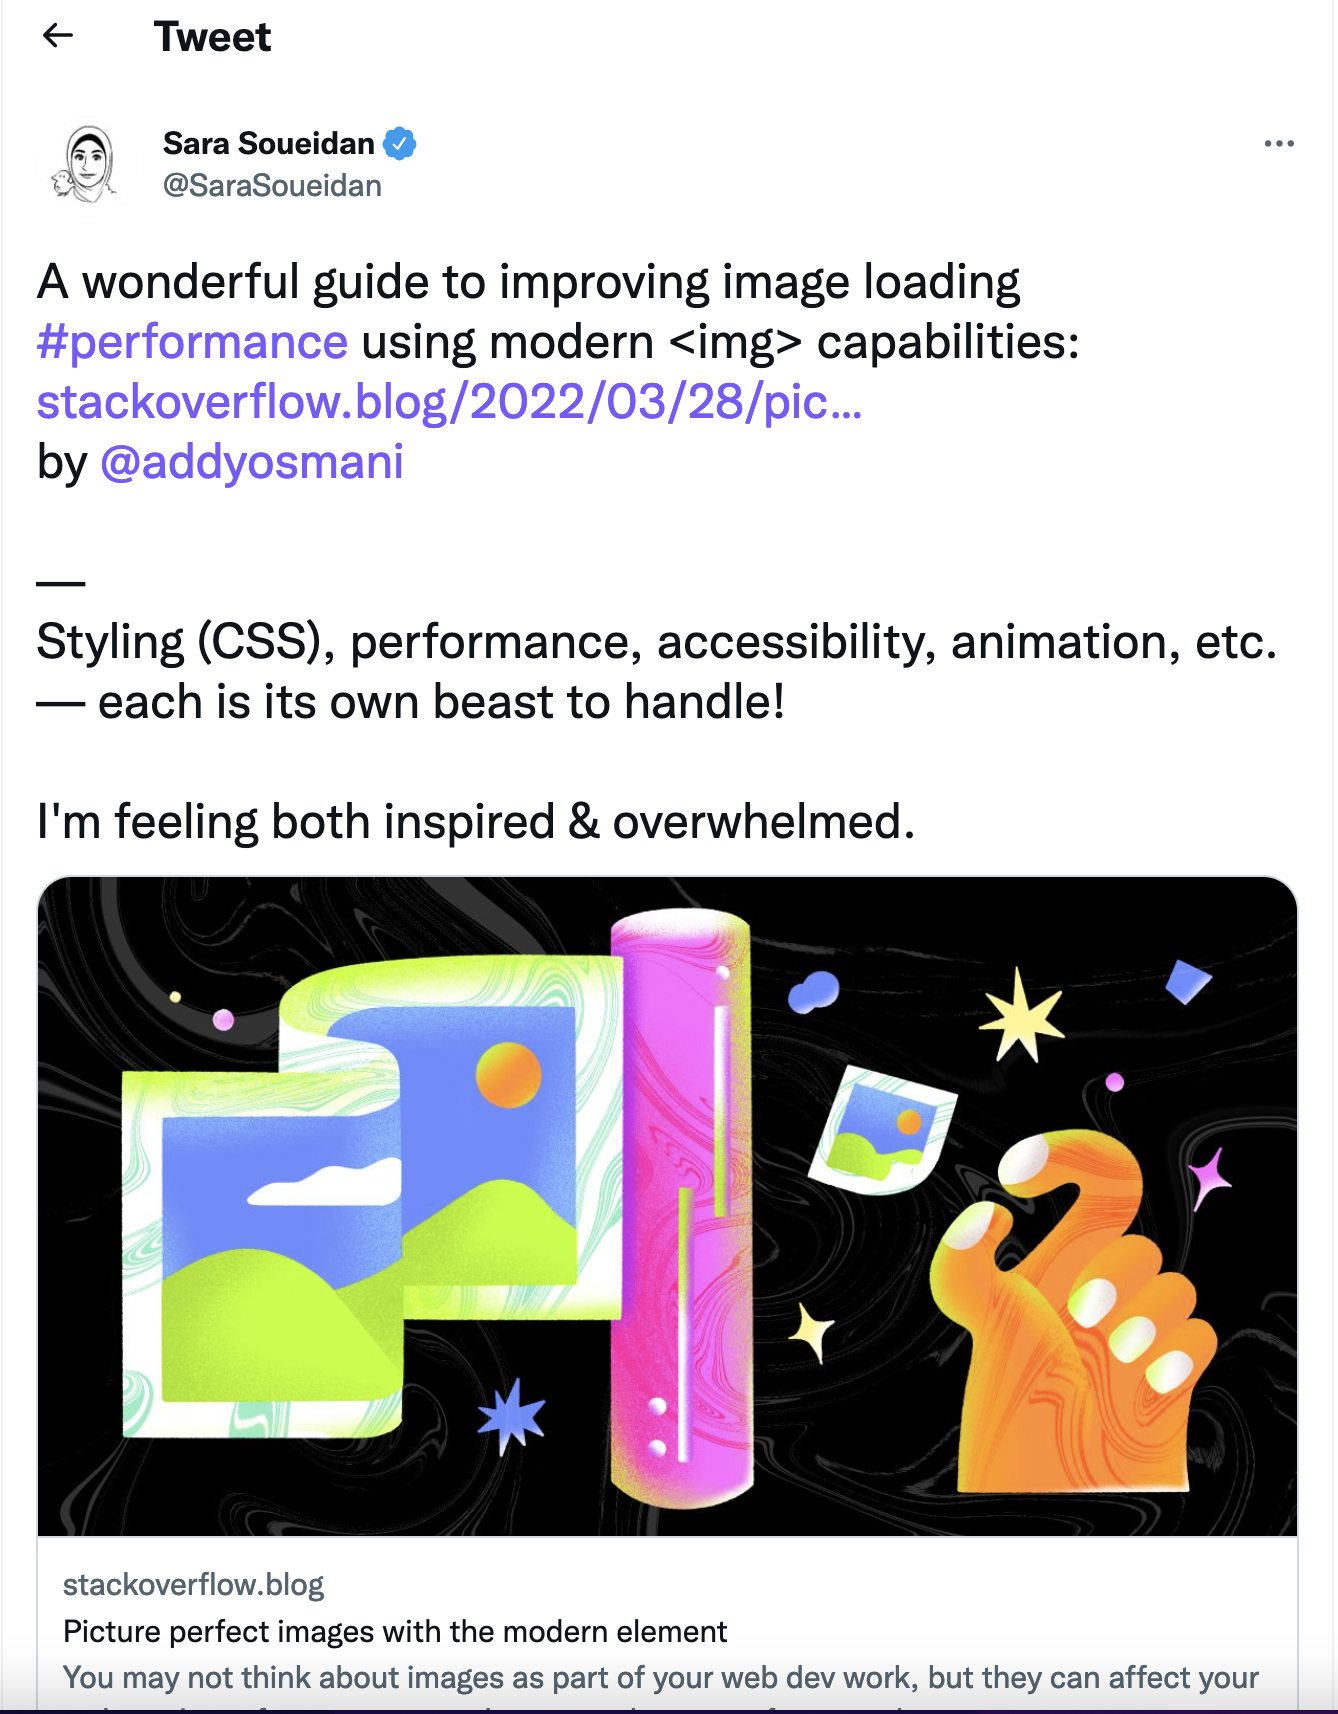 A tweet from Sarah Souidan where she shares a link to a performance article on Stack Overflow